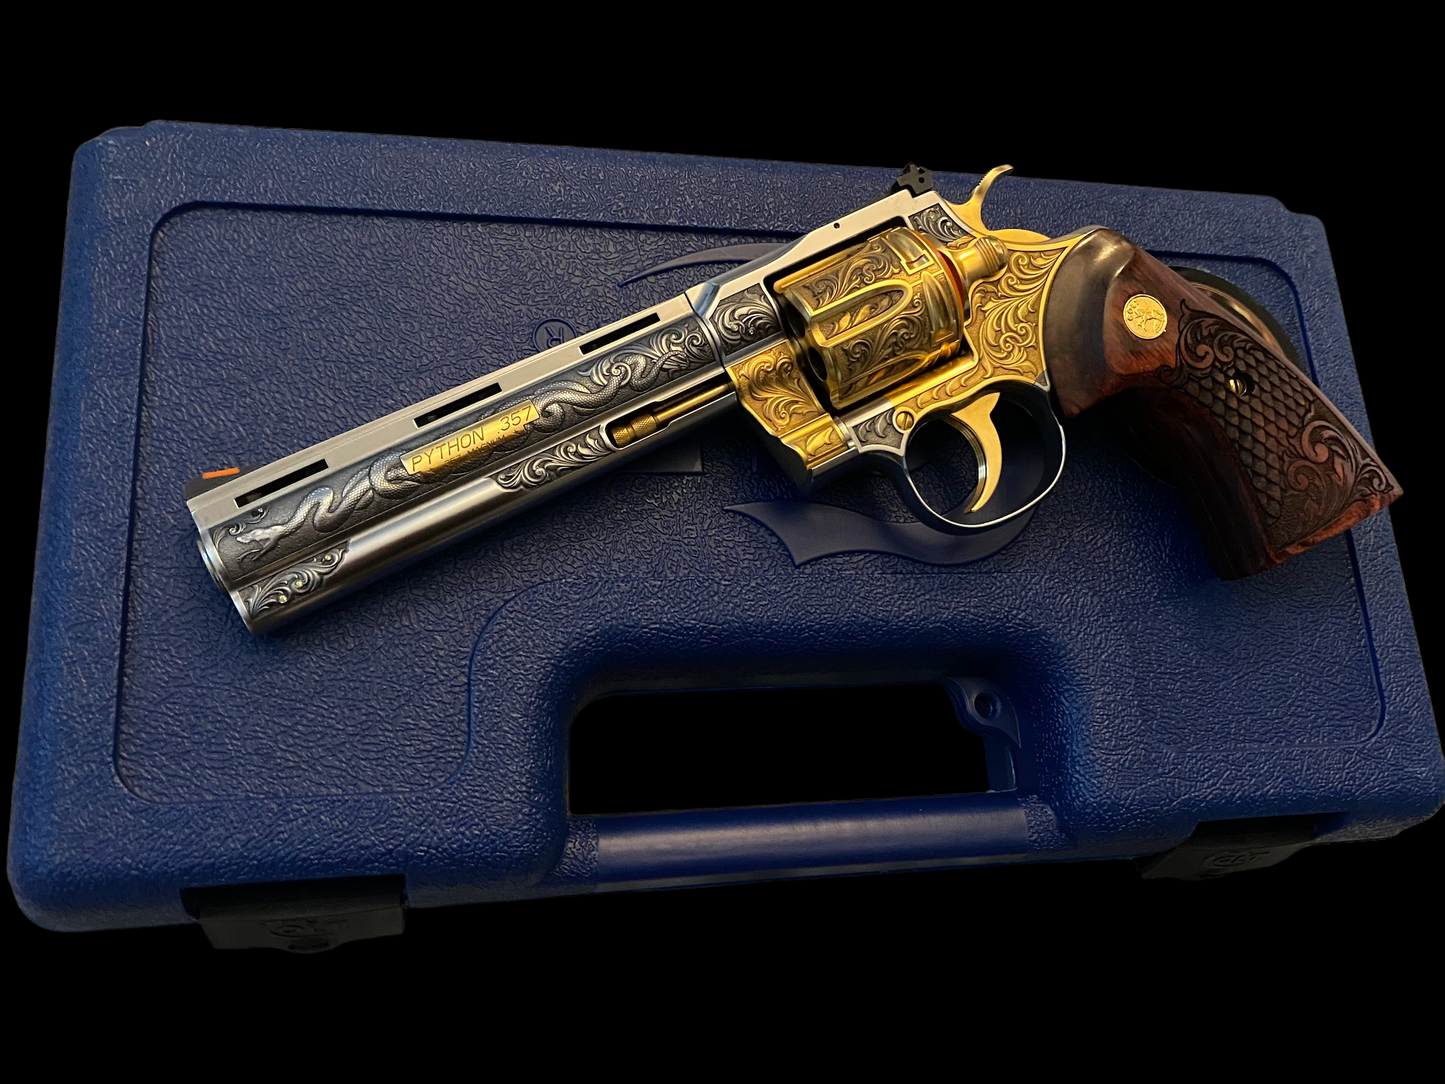 COLT PYTHON 6 INCH ENGRAVED AND 24K GOLD PLATED WITH DIAMONDS